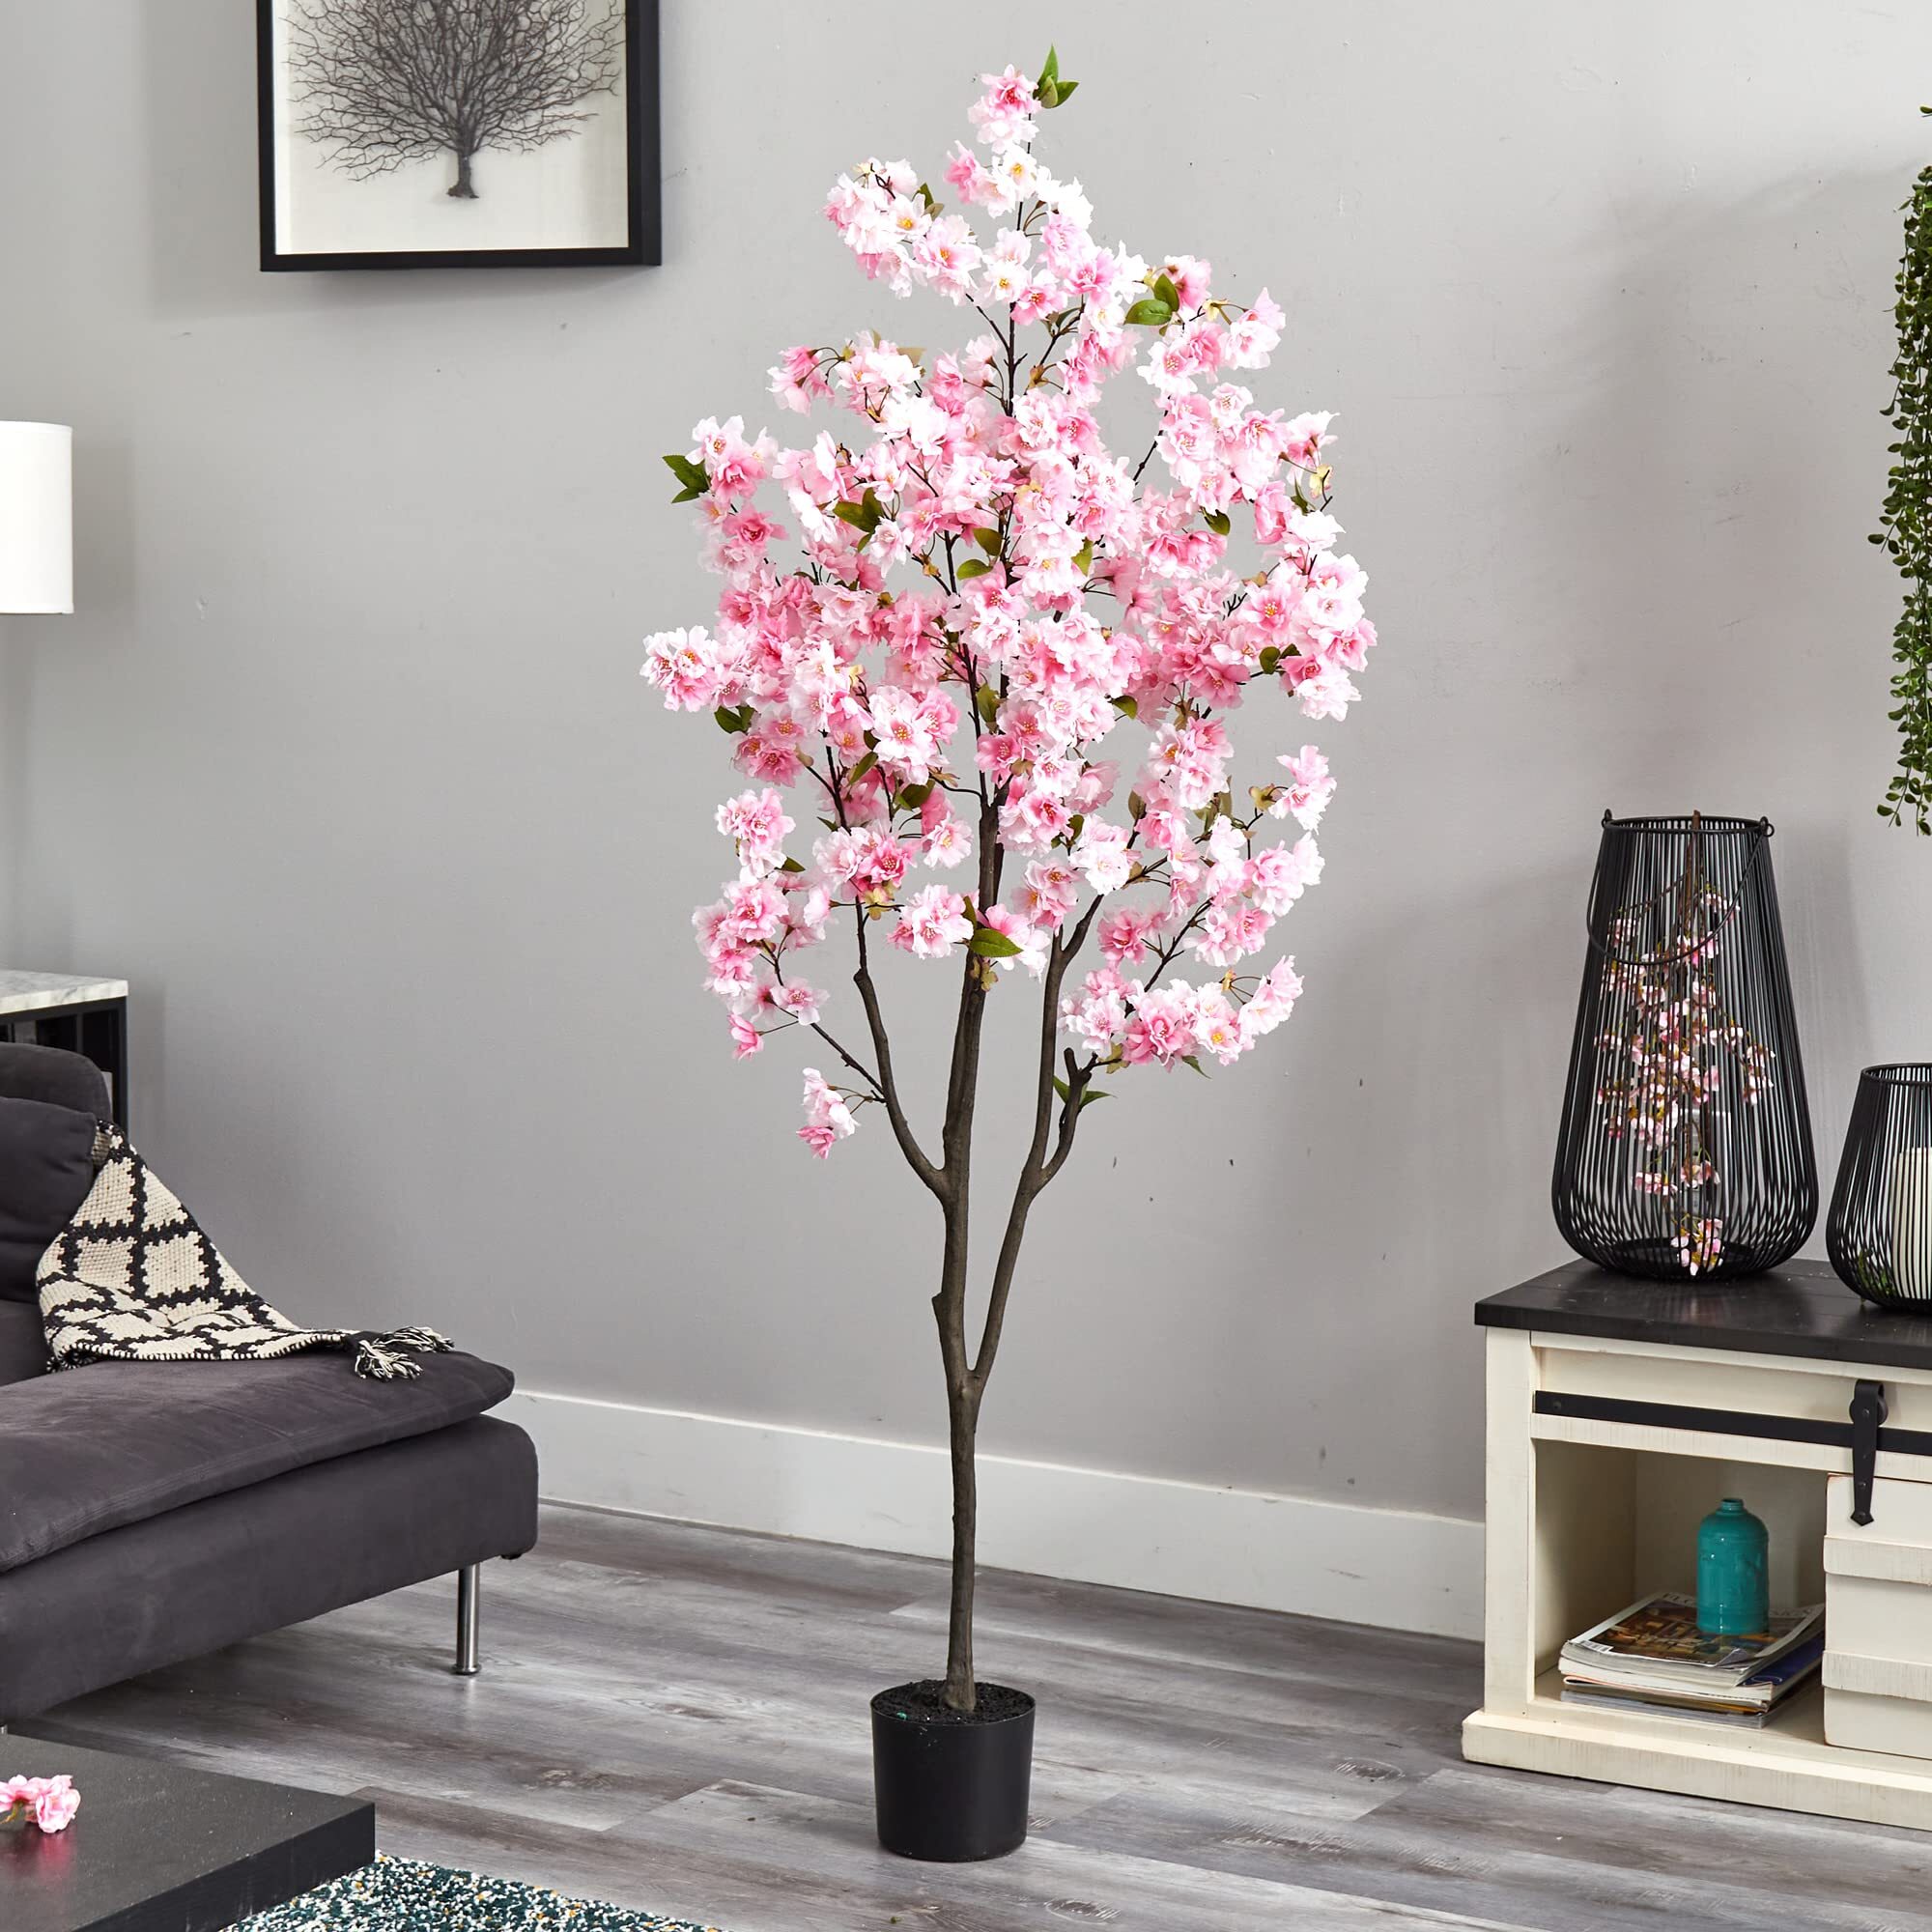 ✨HOT SALE✨Nearly Natural 6ft. Cherry Blossom Artificial Tree🌸